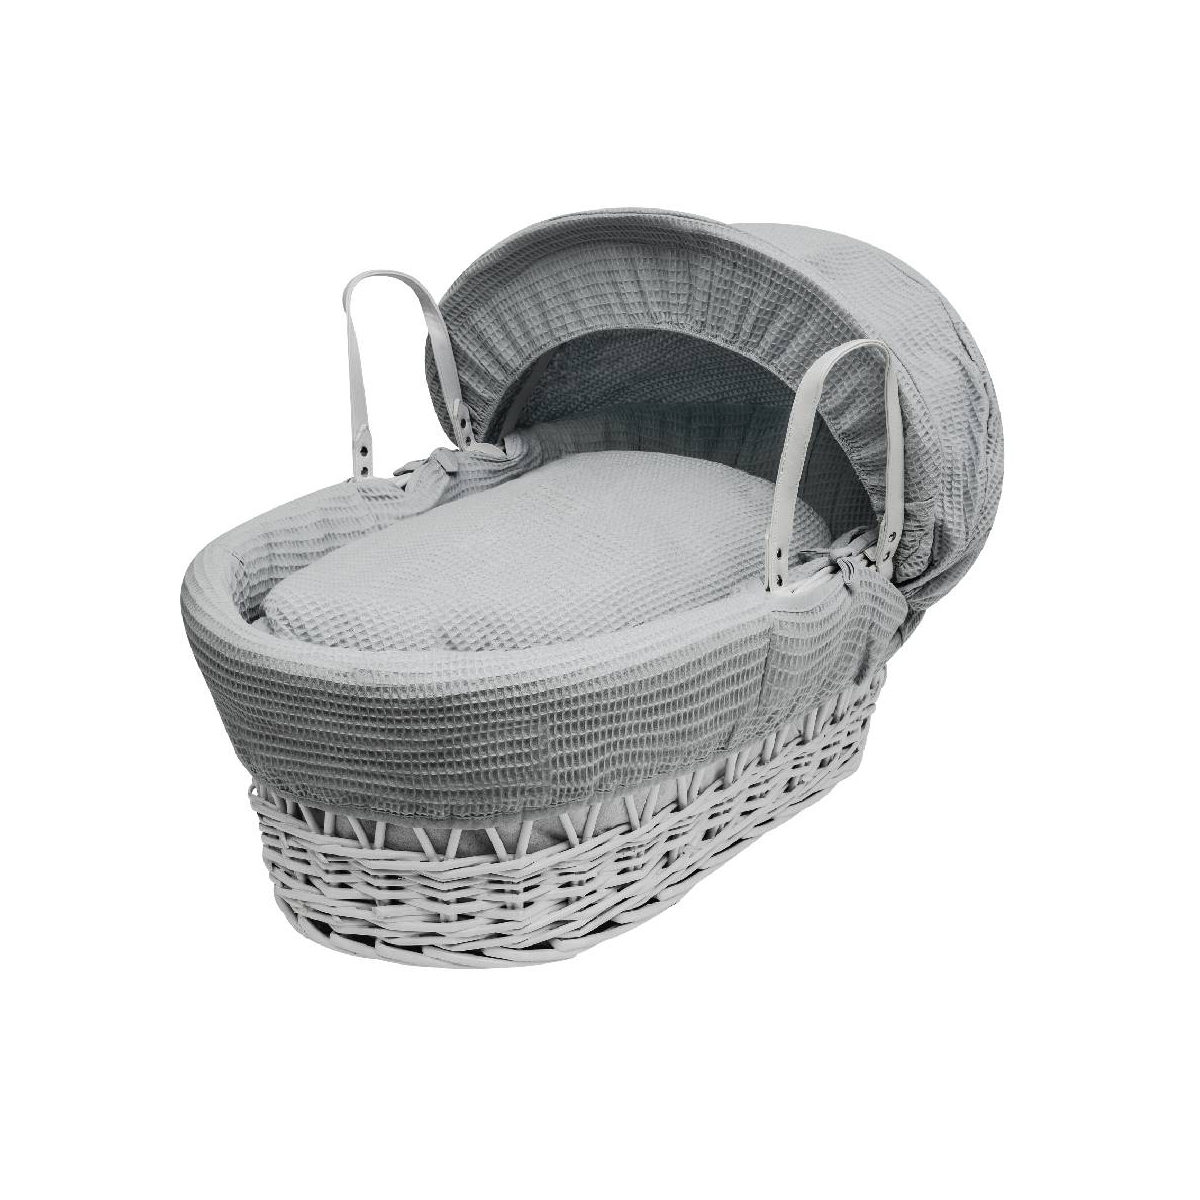 Kinder Valley Waffle White Wicker Moses Basket